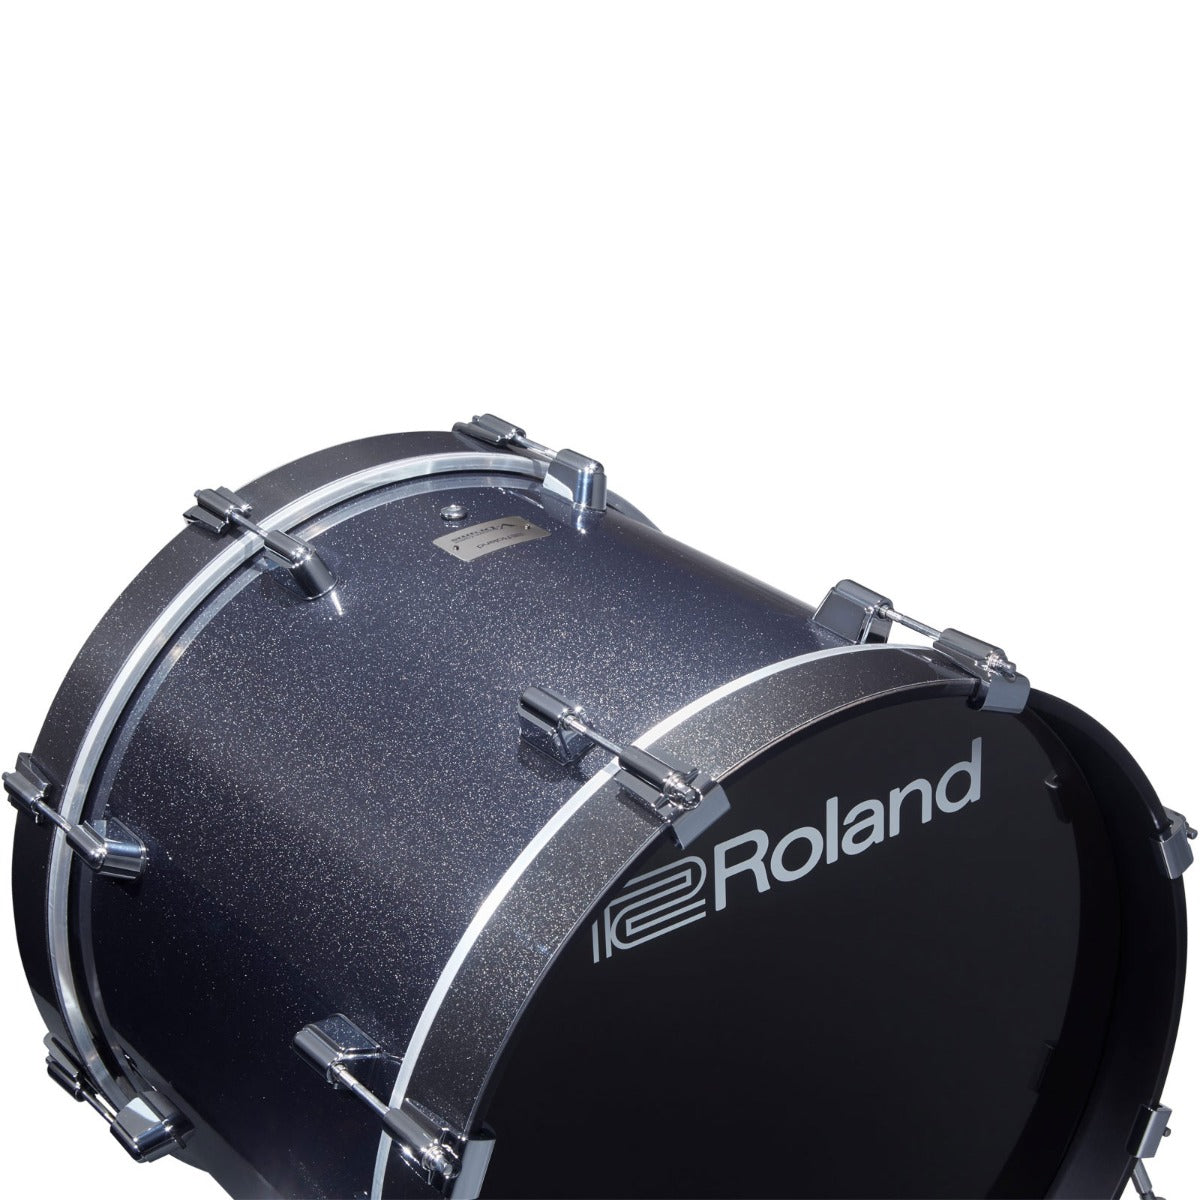 Image of the top of the Roland KD-200-MS 20" Kick Drum Pad